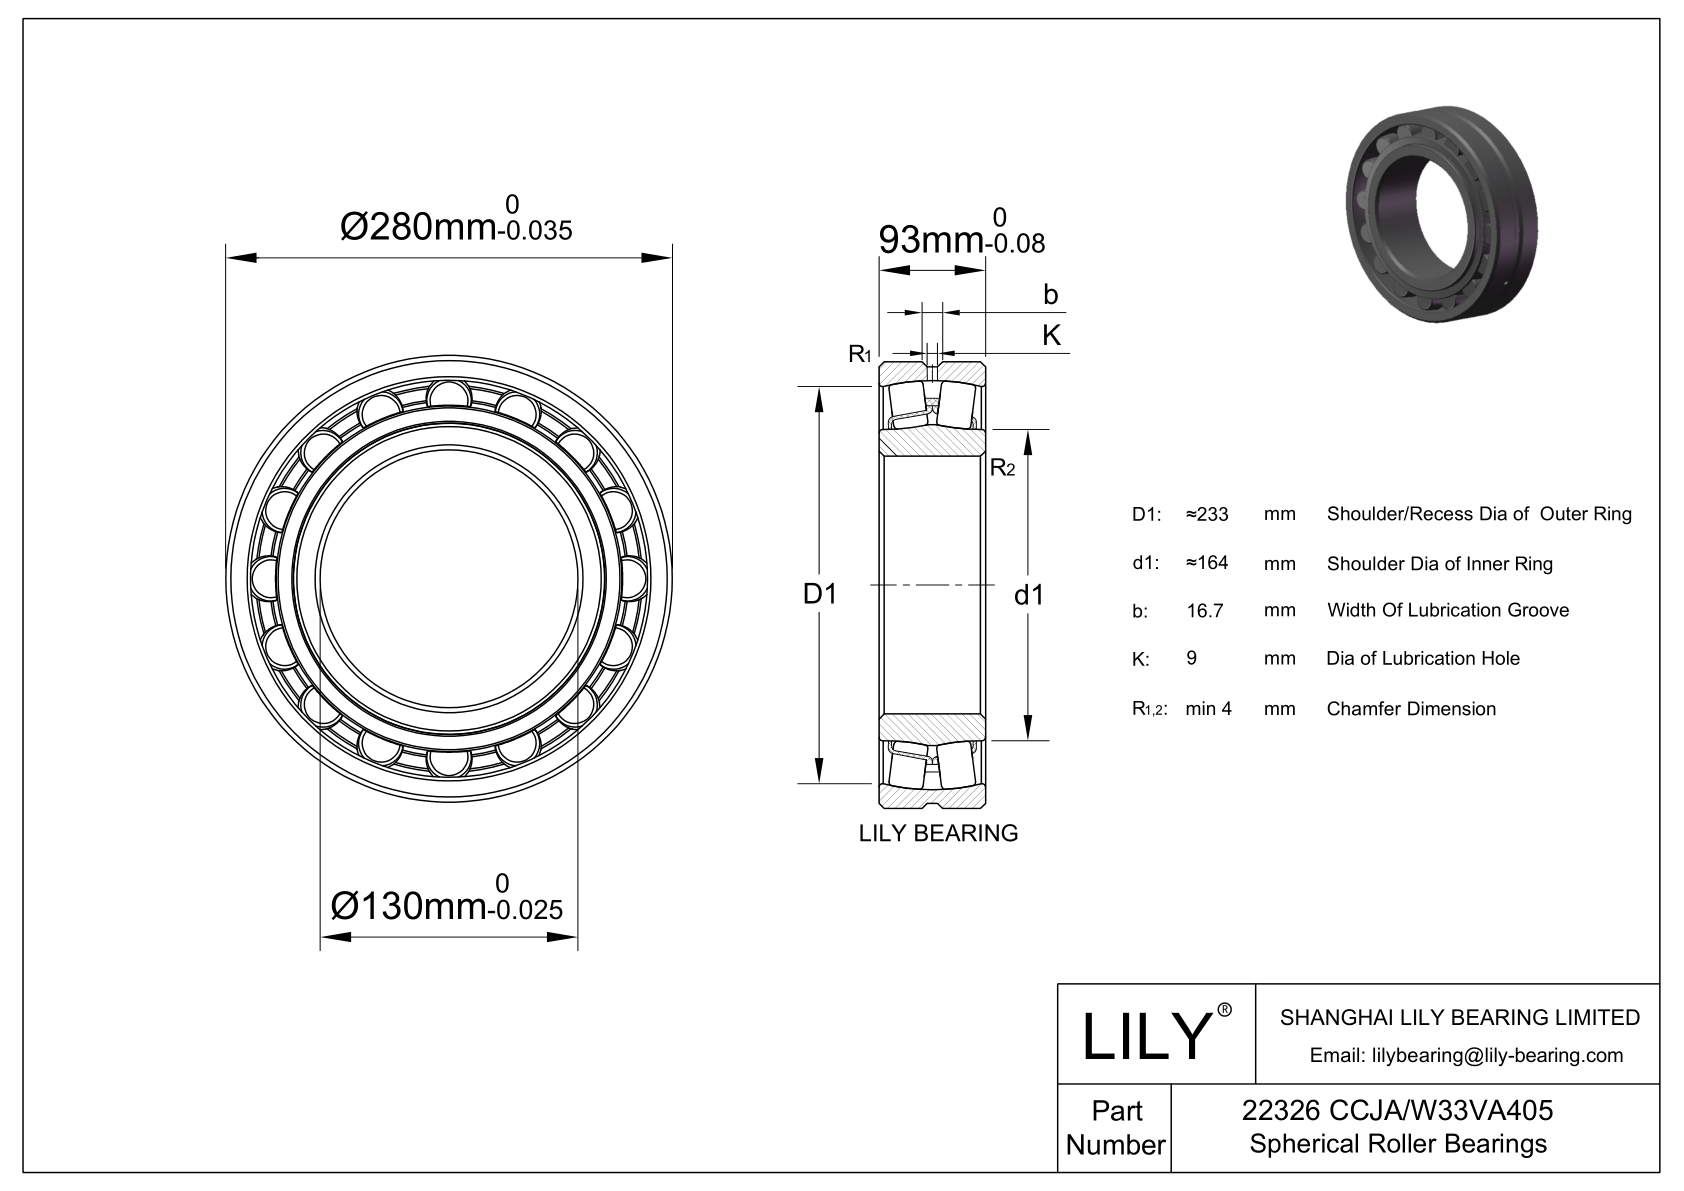 22326 CCJA/W33VA405 Double Row Spherical Roller Bearing cad drawing